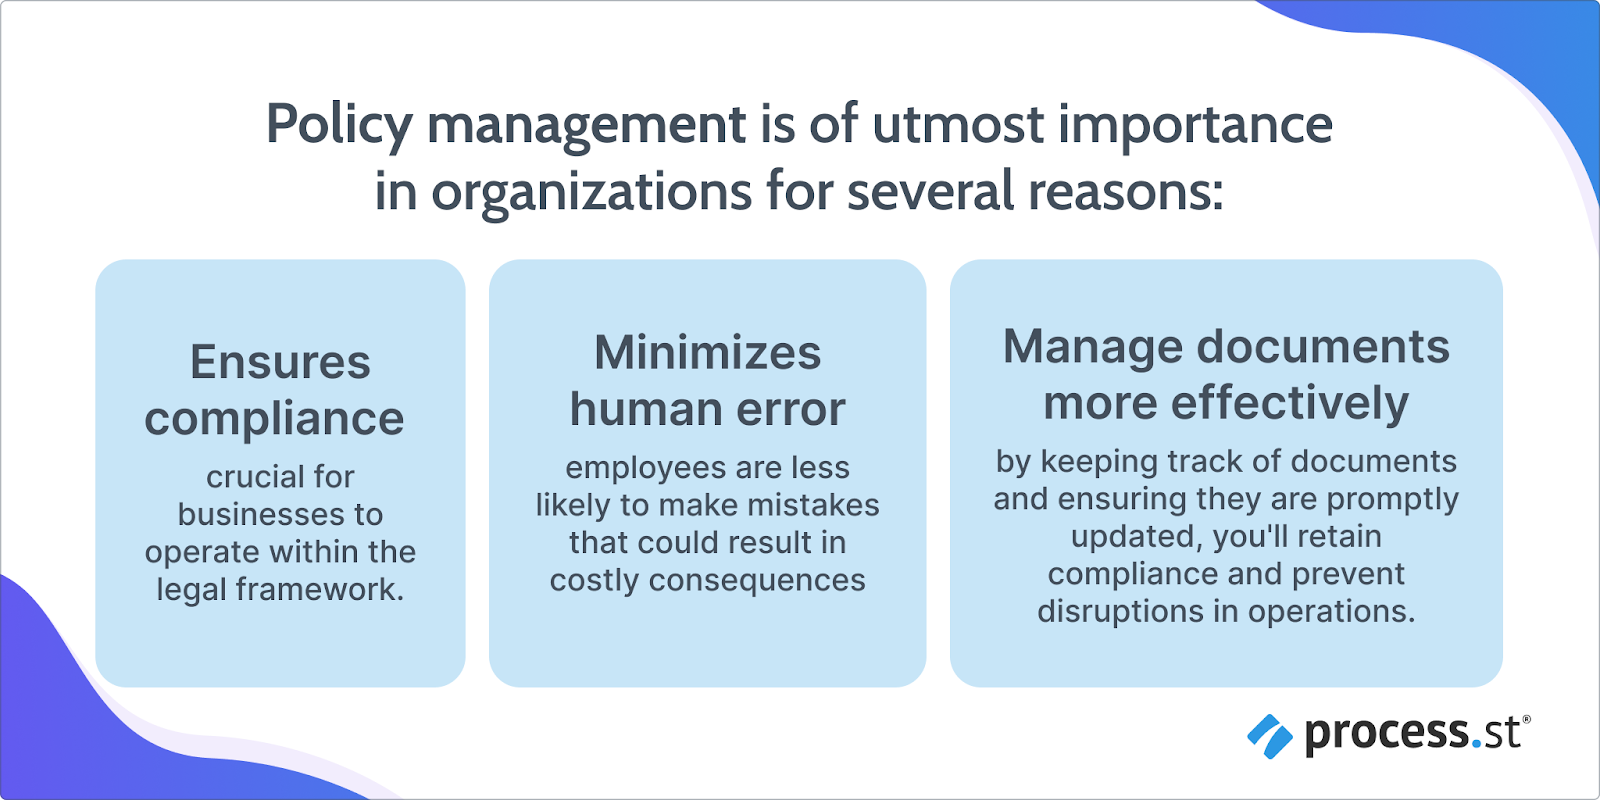 image showing the importance of policy and procedure management software